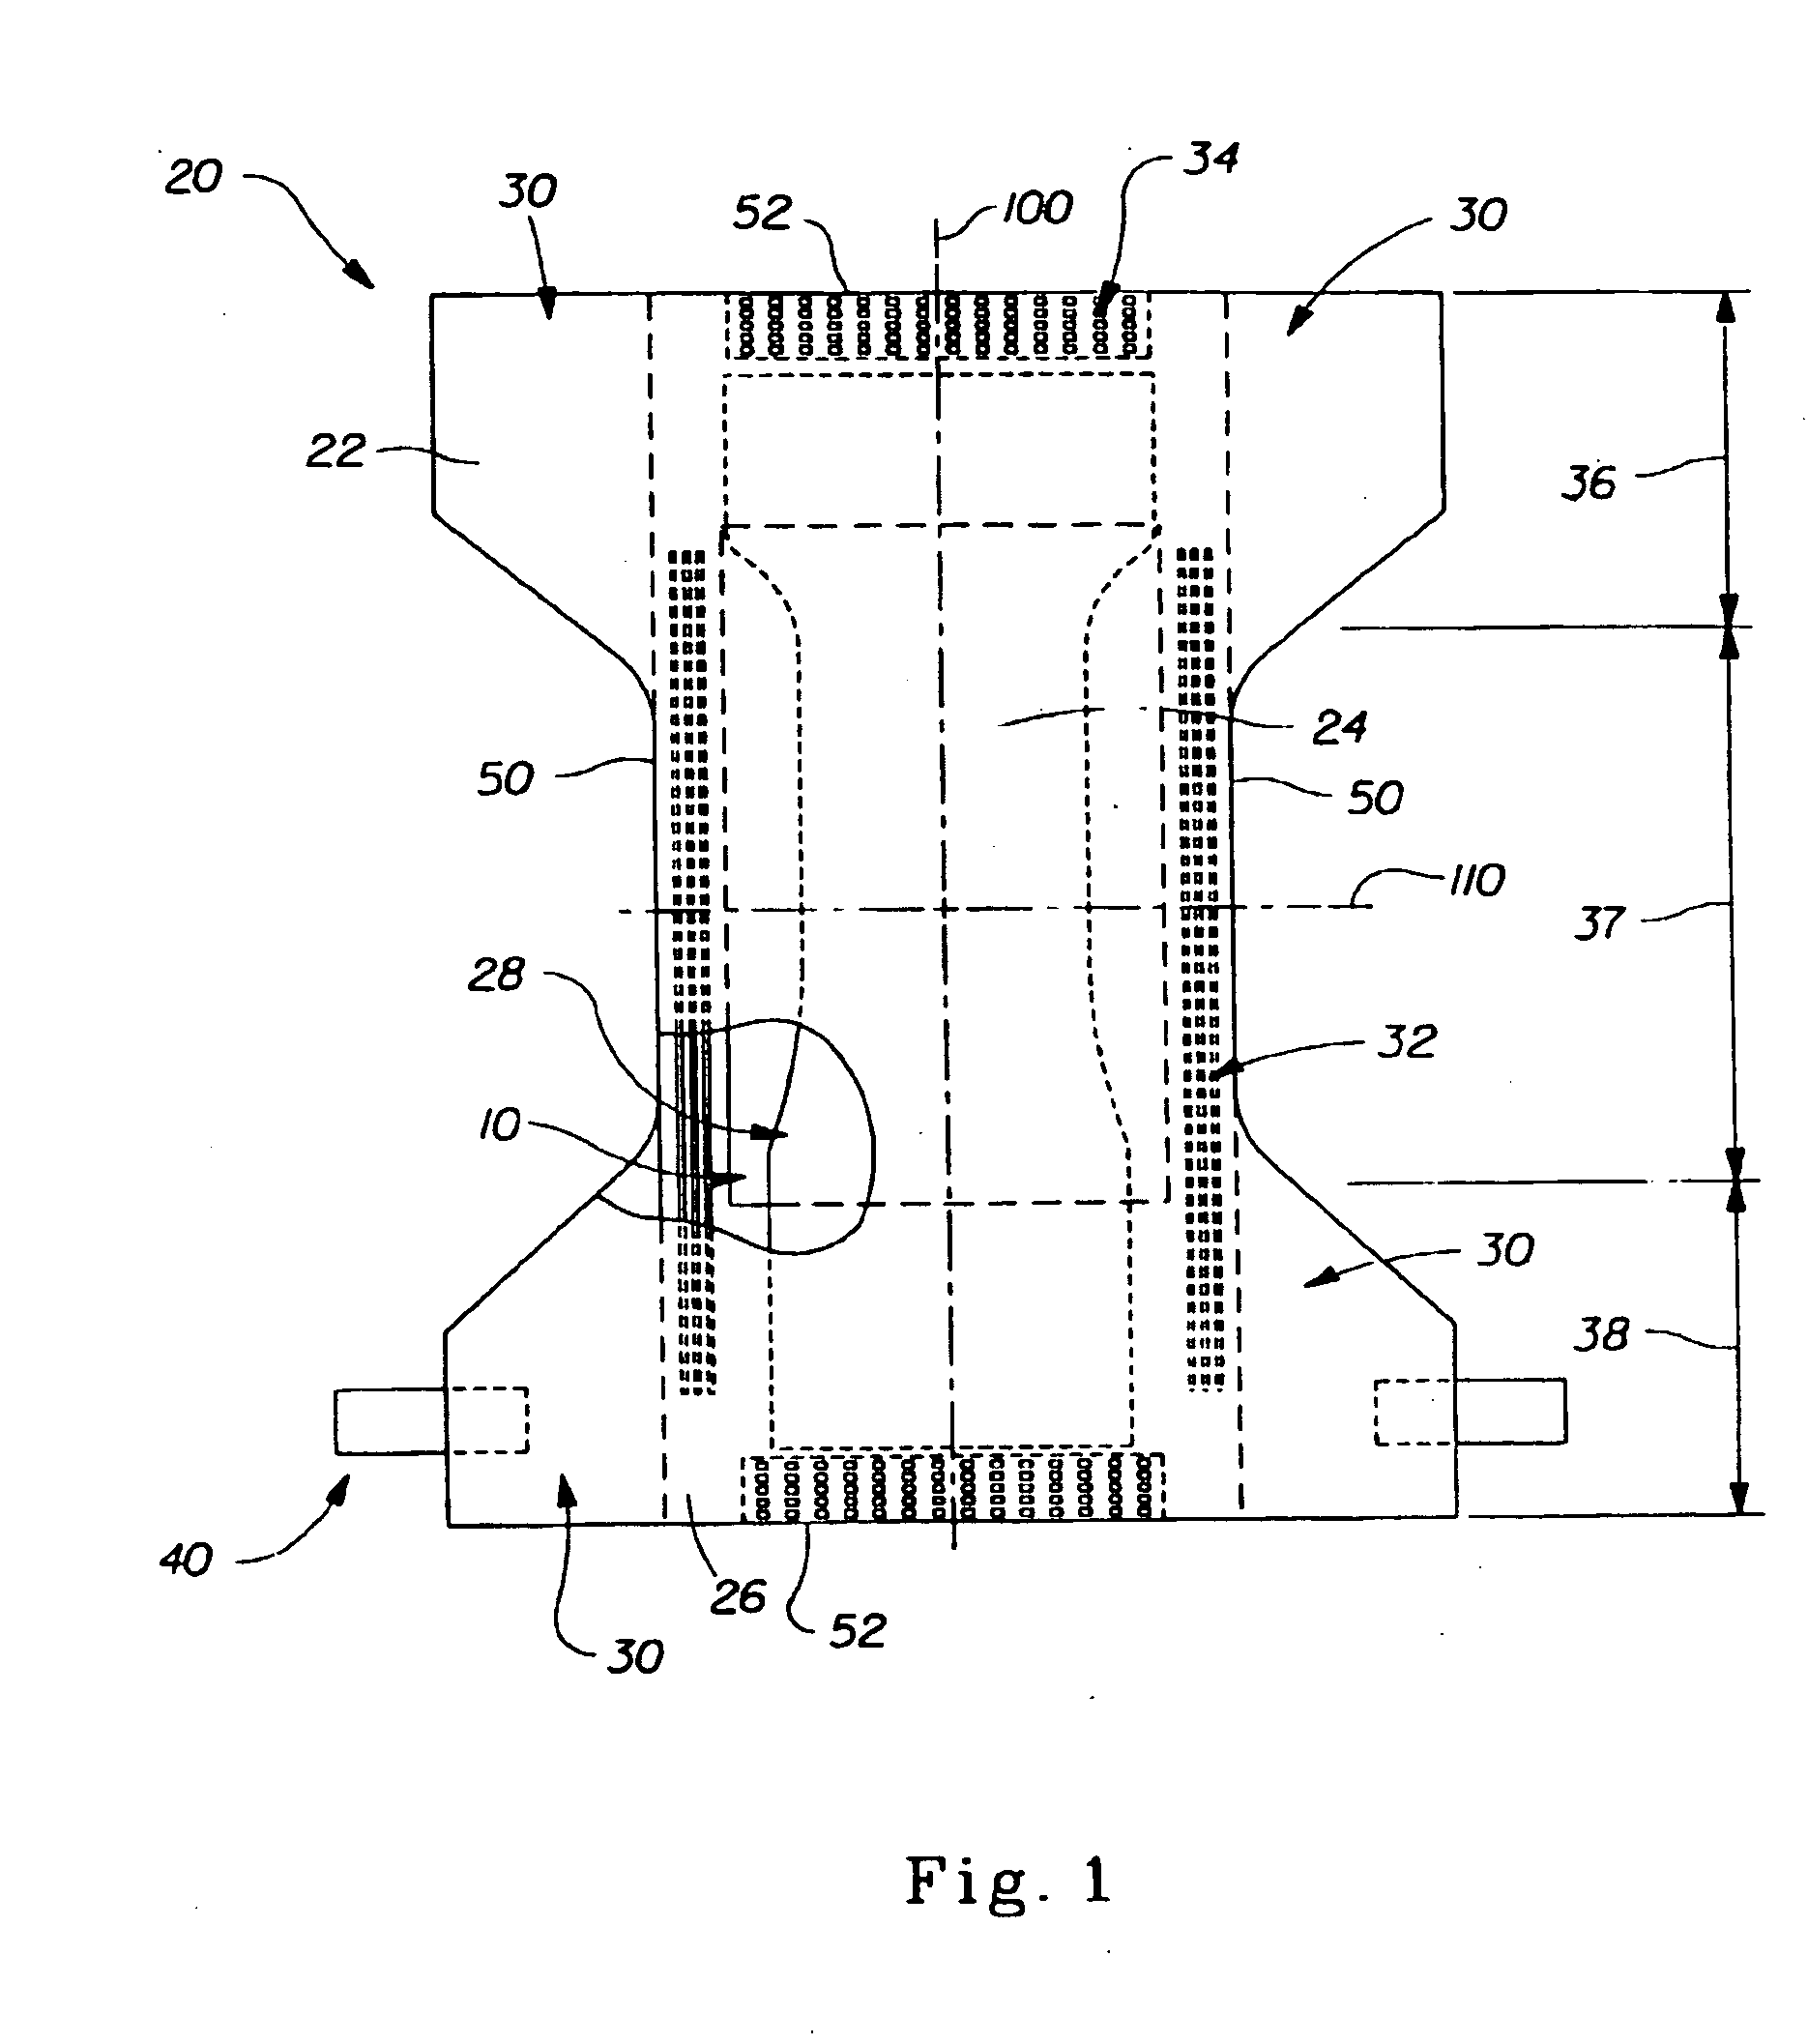 Breathable absorbent articles and composites comprising a vapor permeable, liquid barrier layer